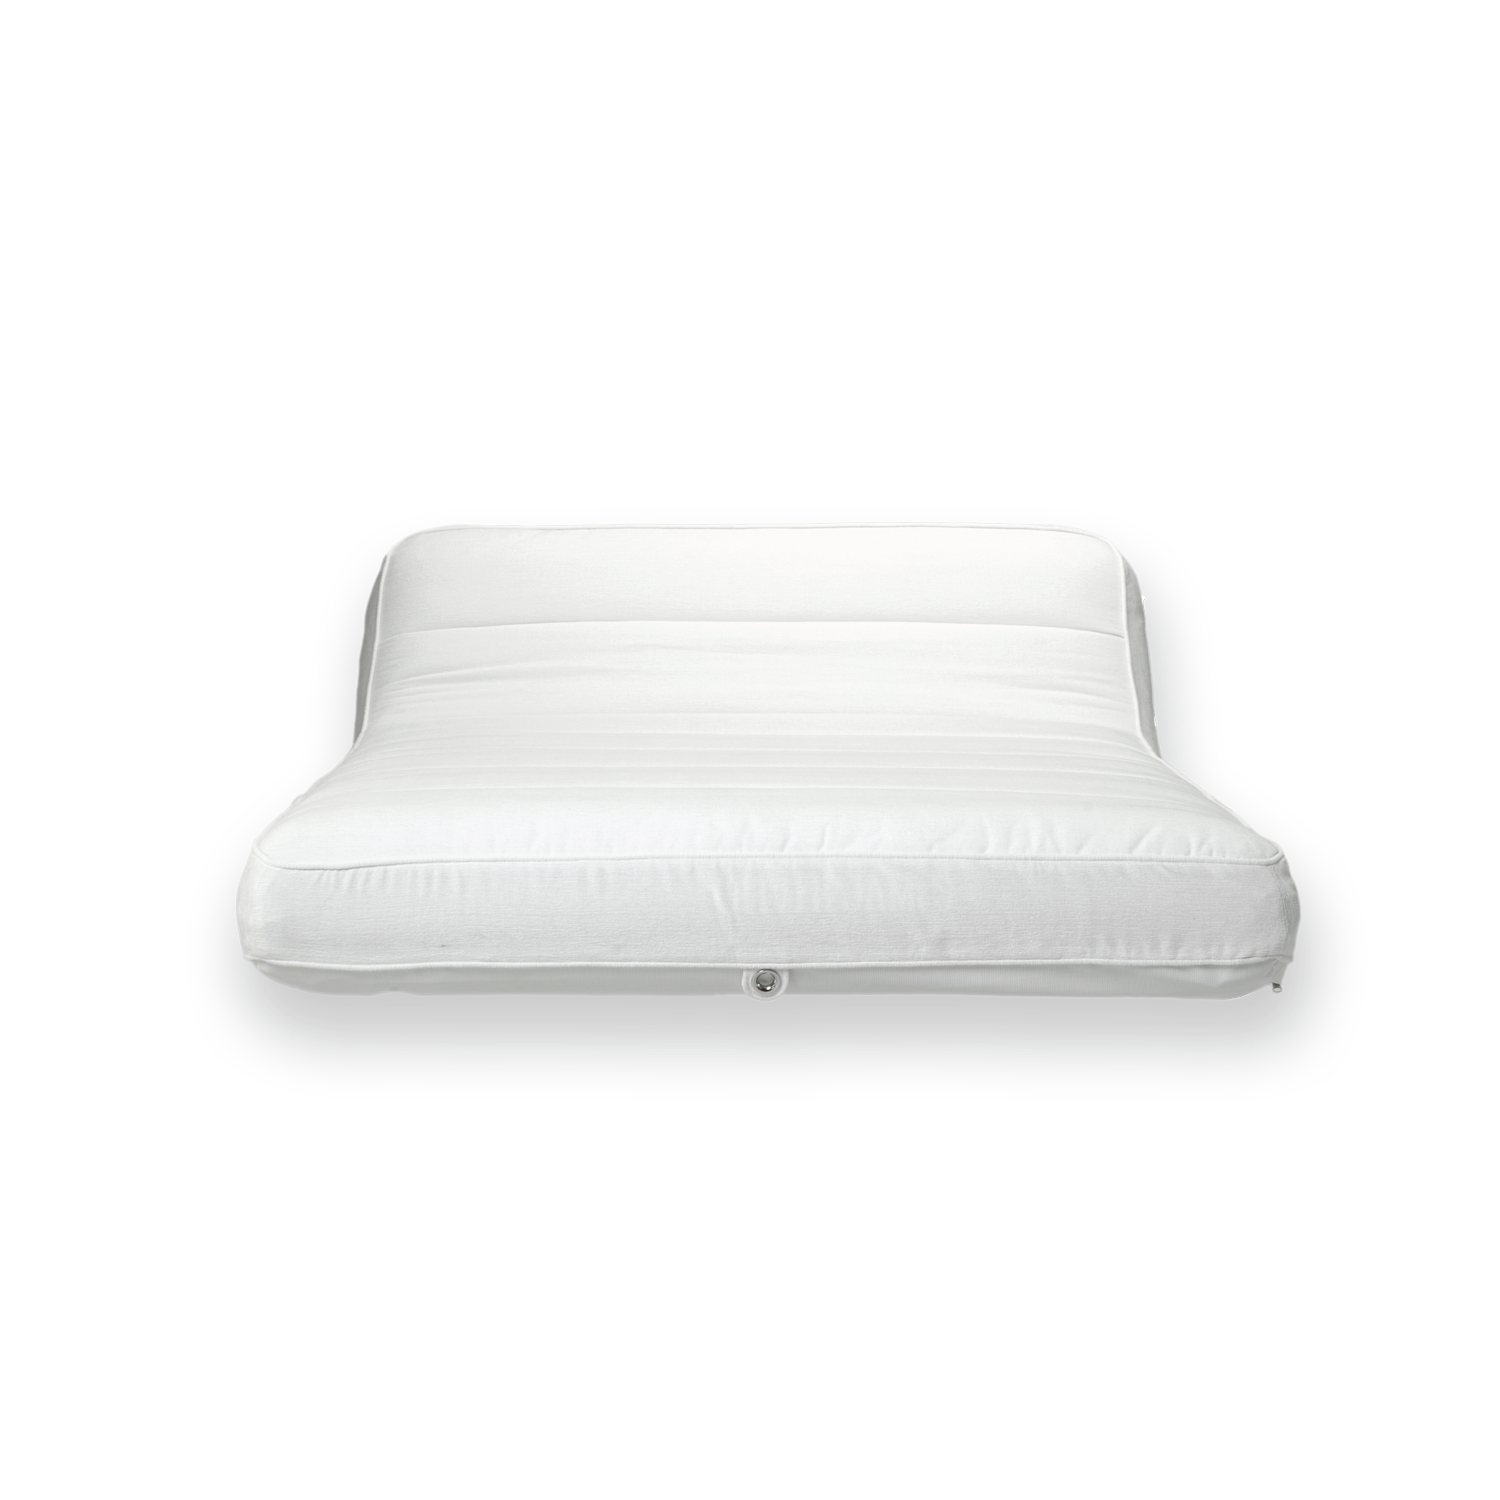 The front profile of a double white terry towel luxury pool float.